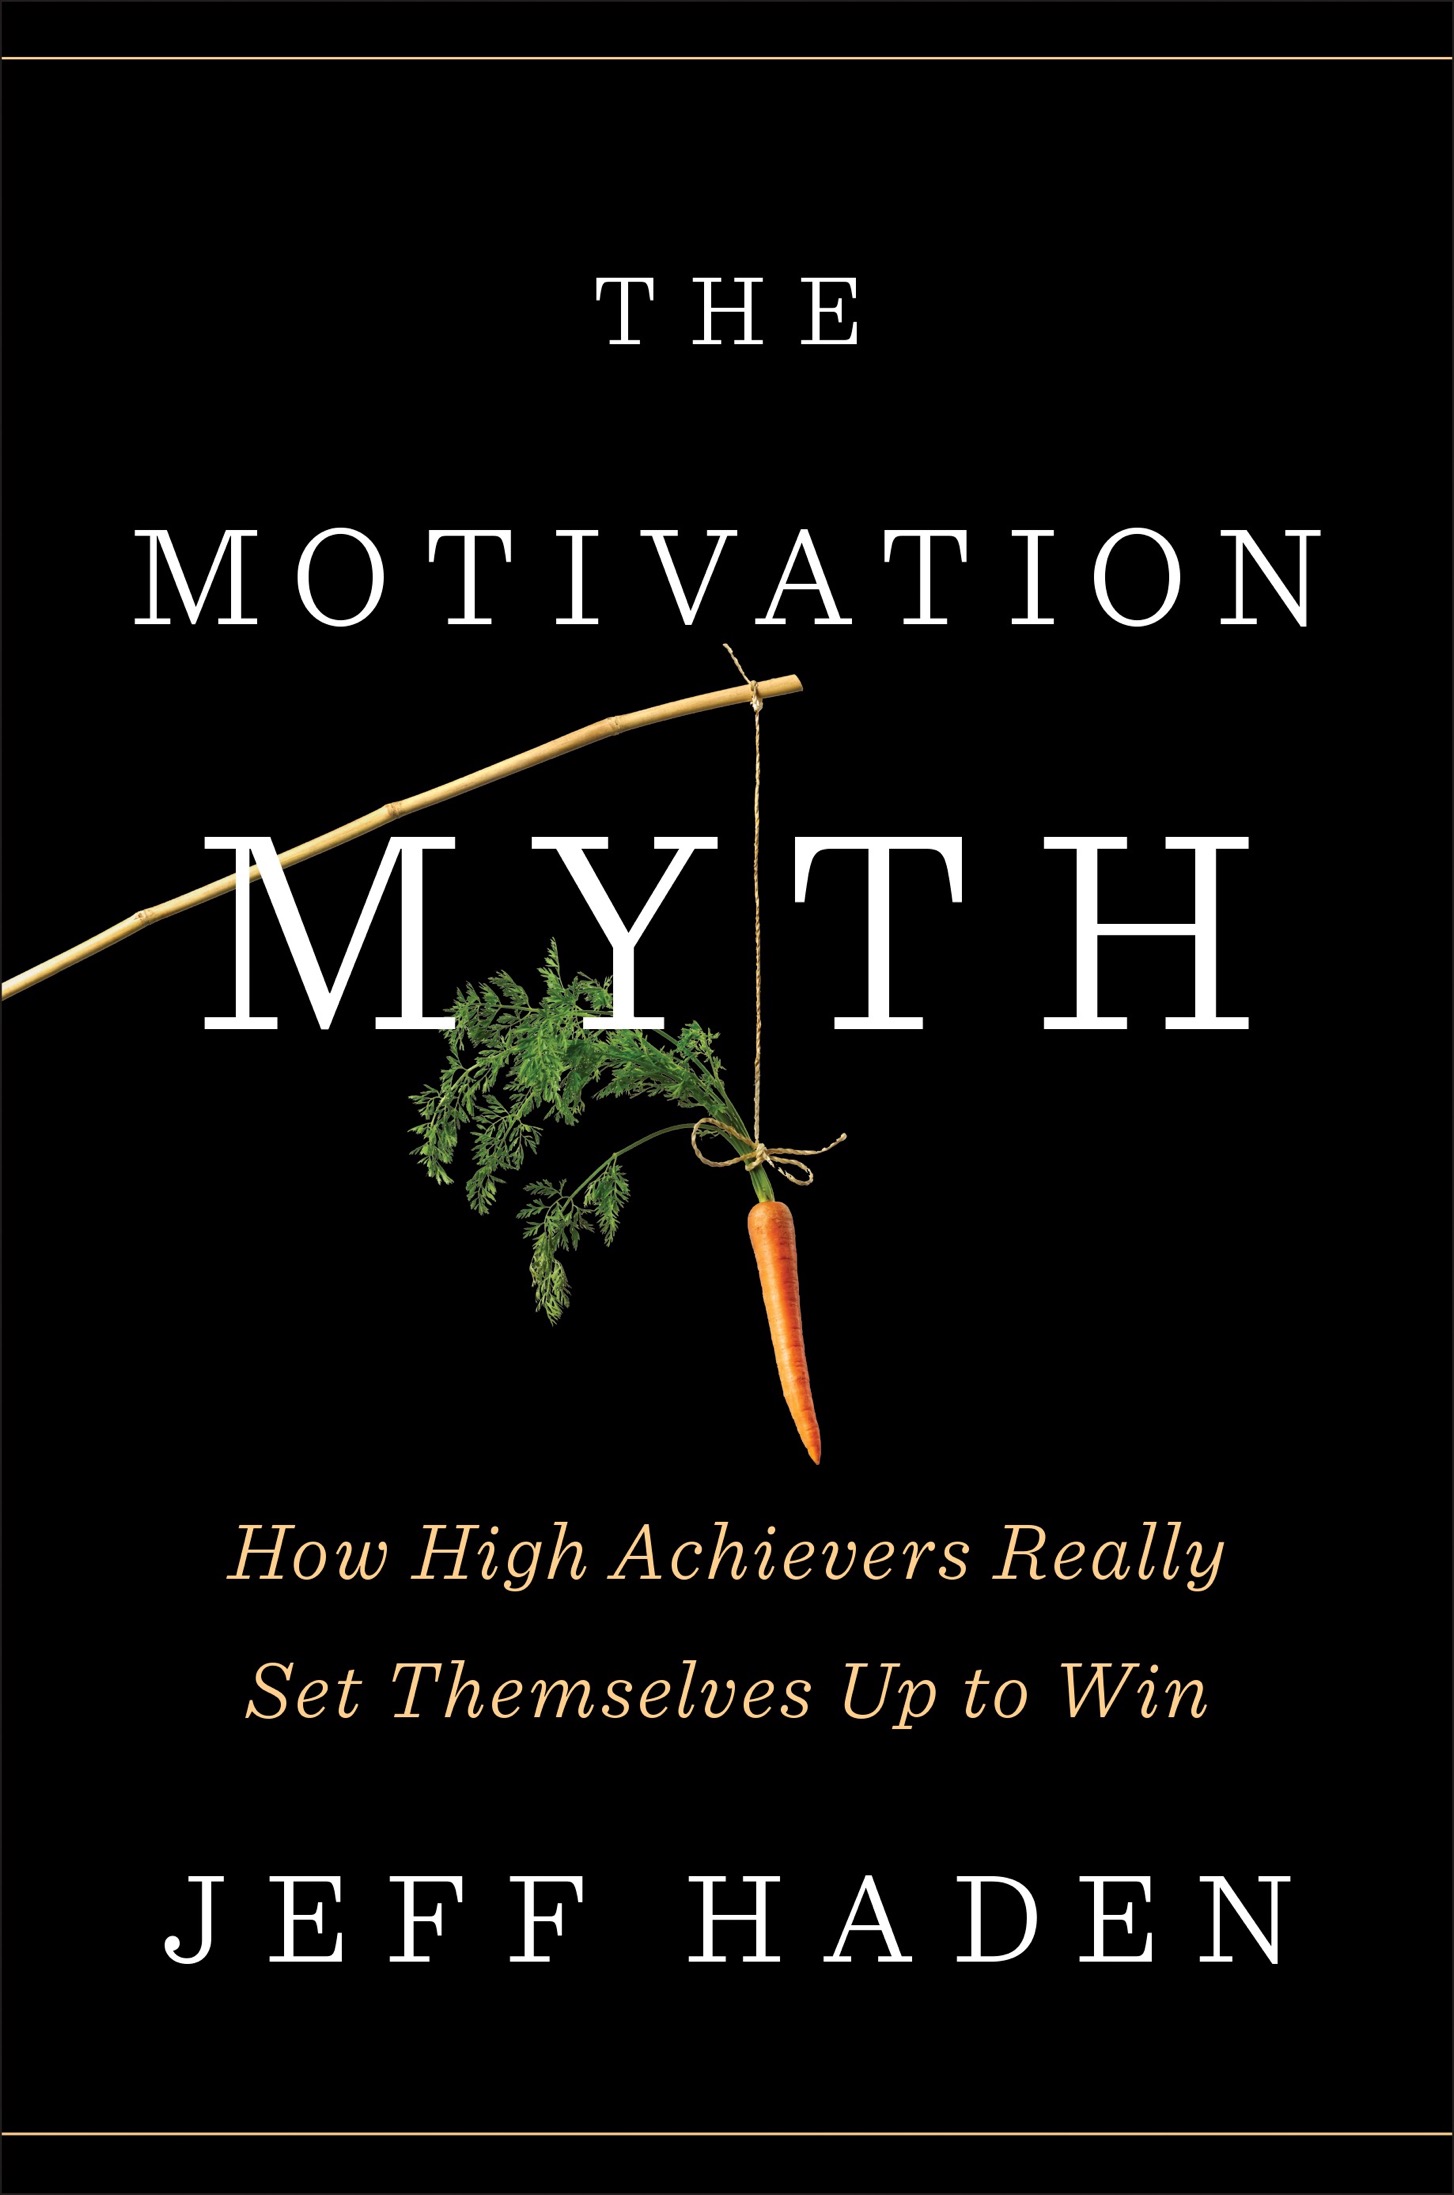 The motivation myth how high achievers really set themselves up to win - image 1